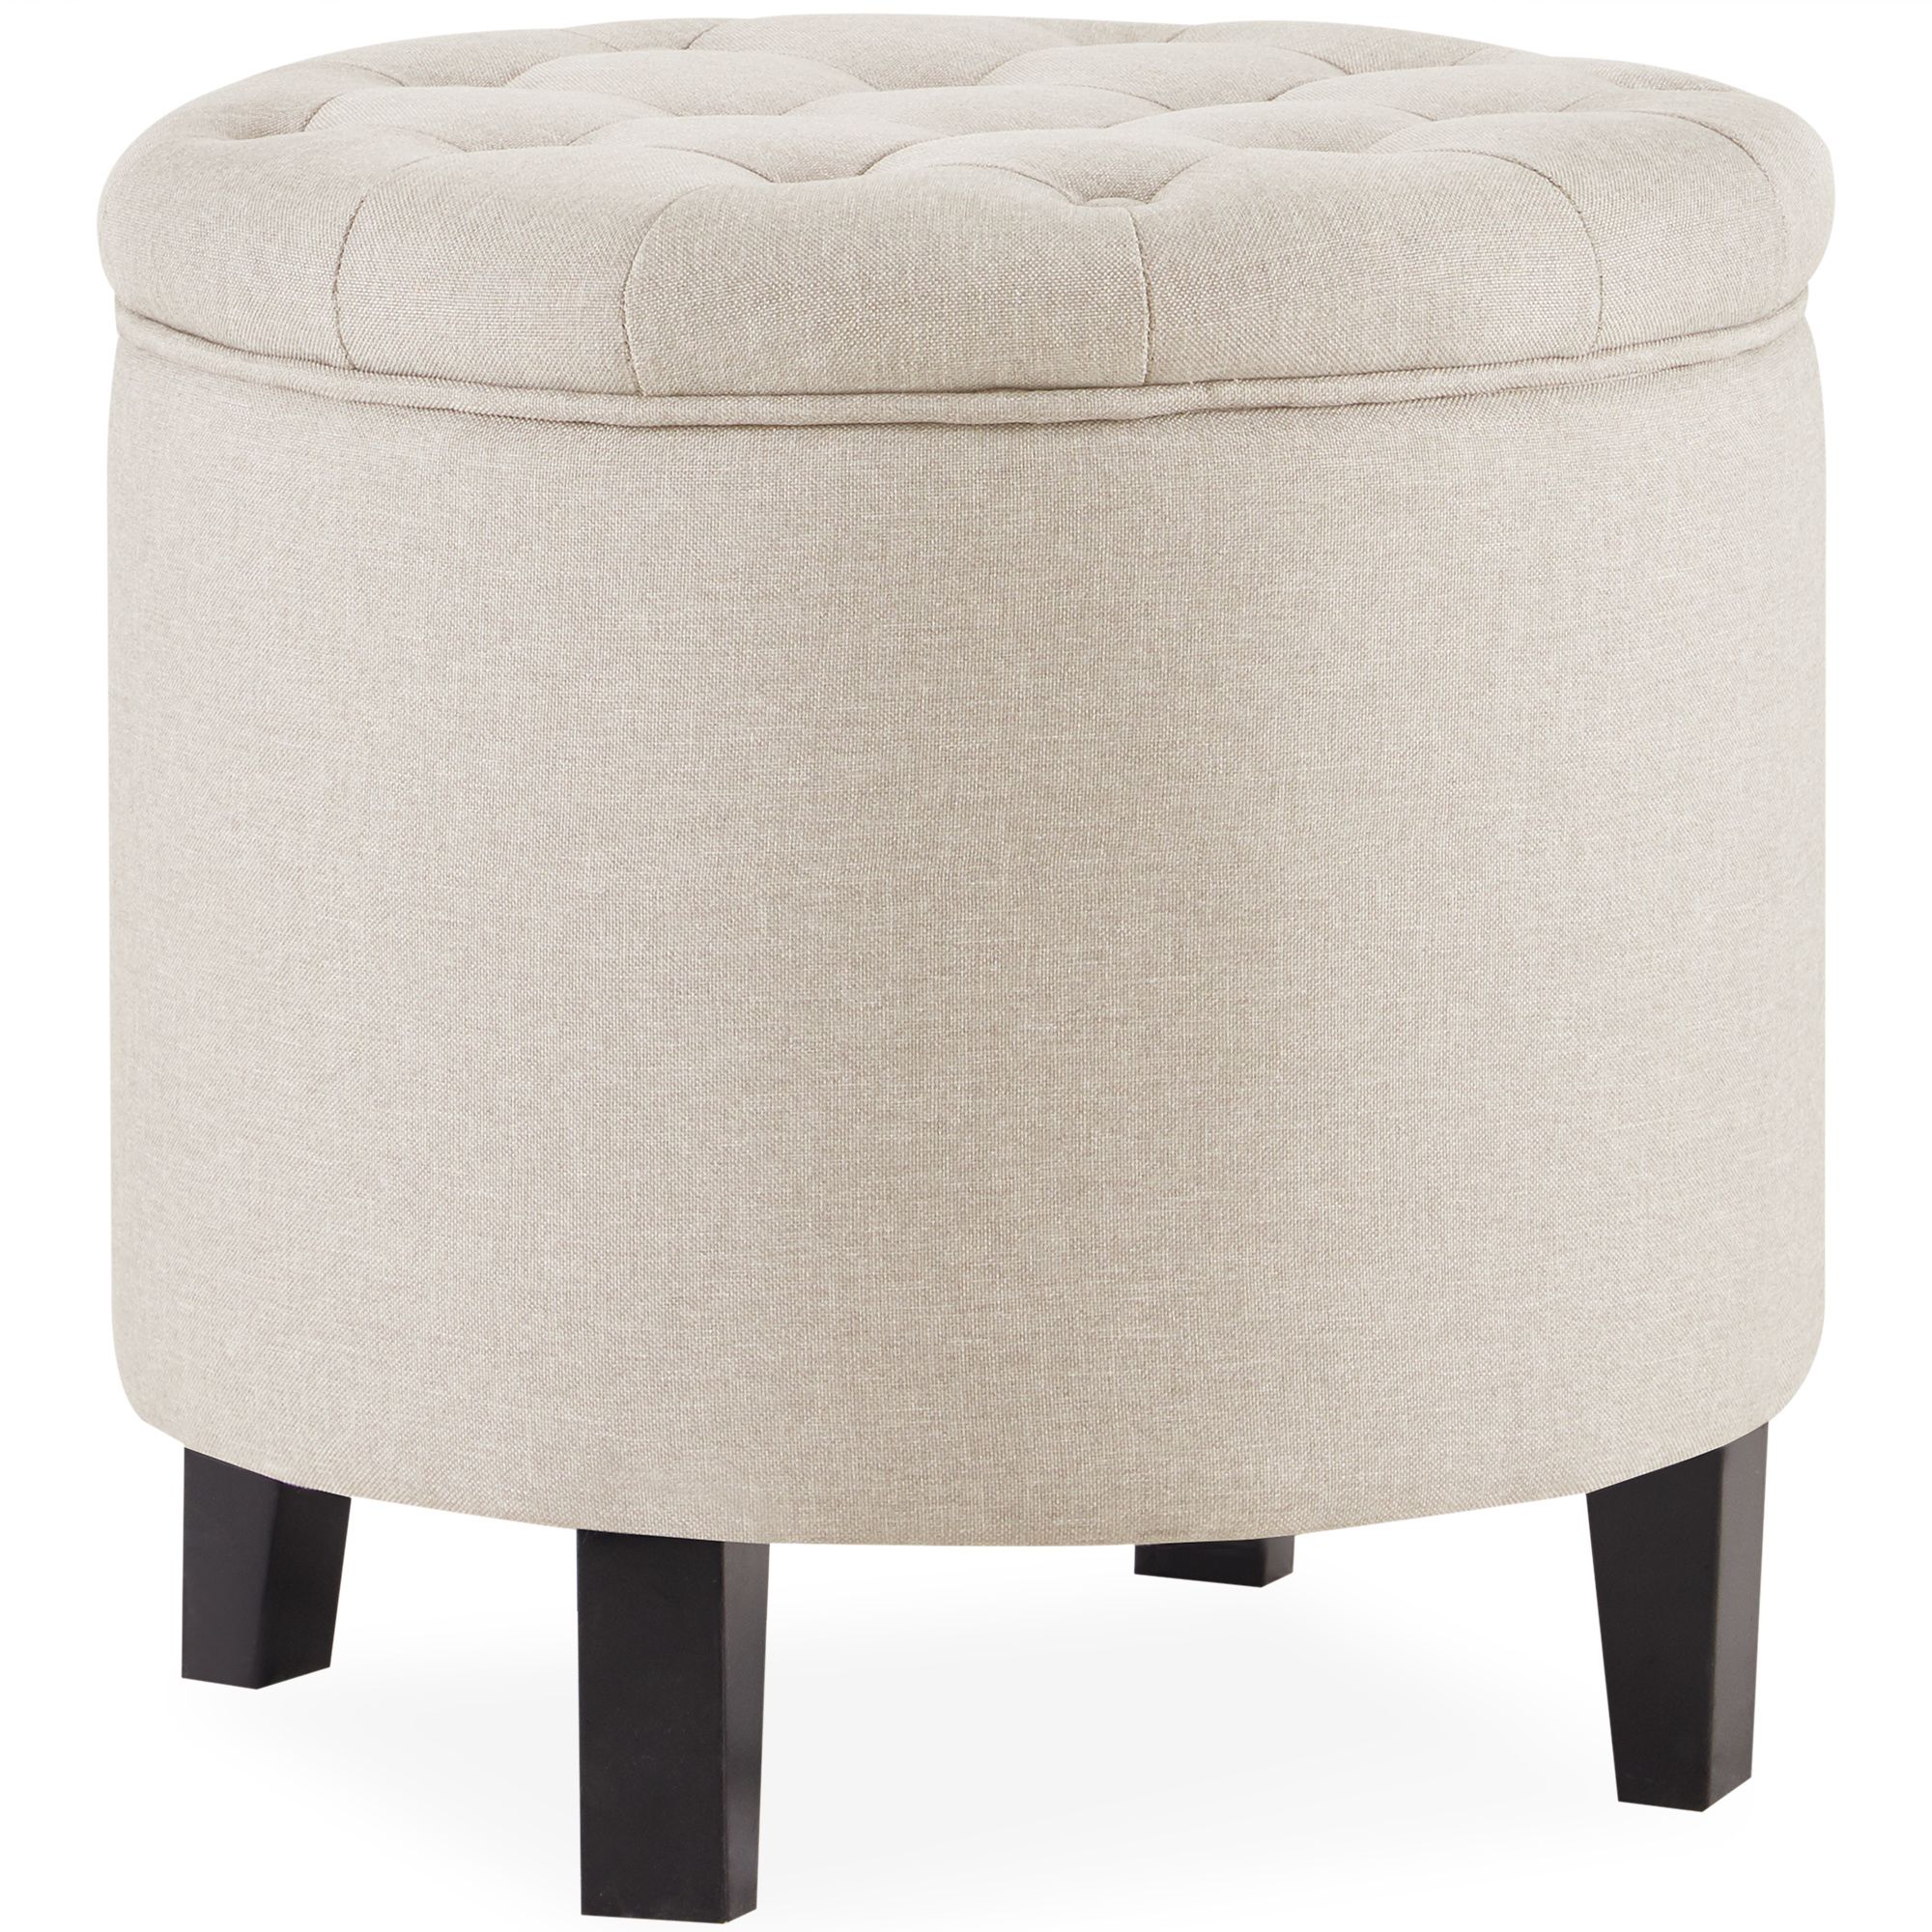 Belleze Nailhead Round Tufted Storage Ottoman Large Footrest Stool With Regard To Cream Fabric Tufted Round Storage Ottomans (View 16 of 20)